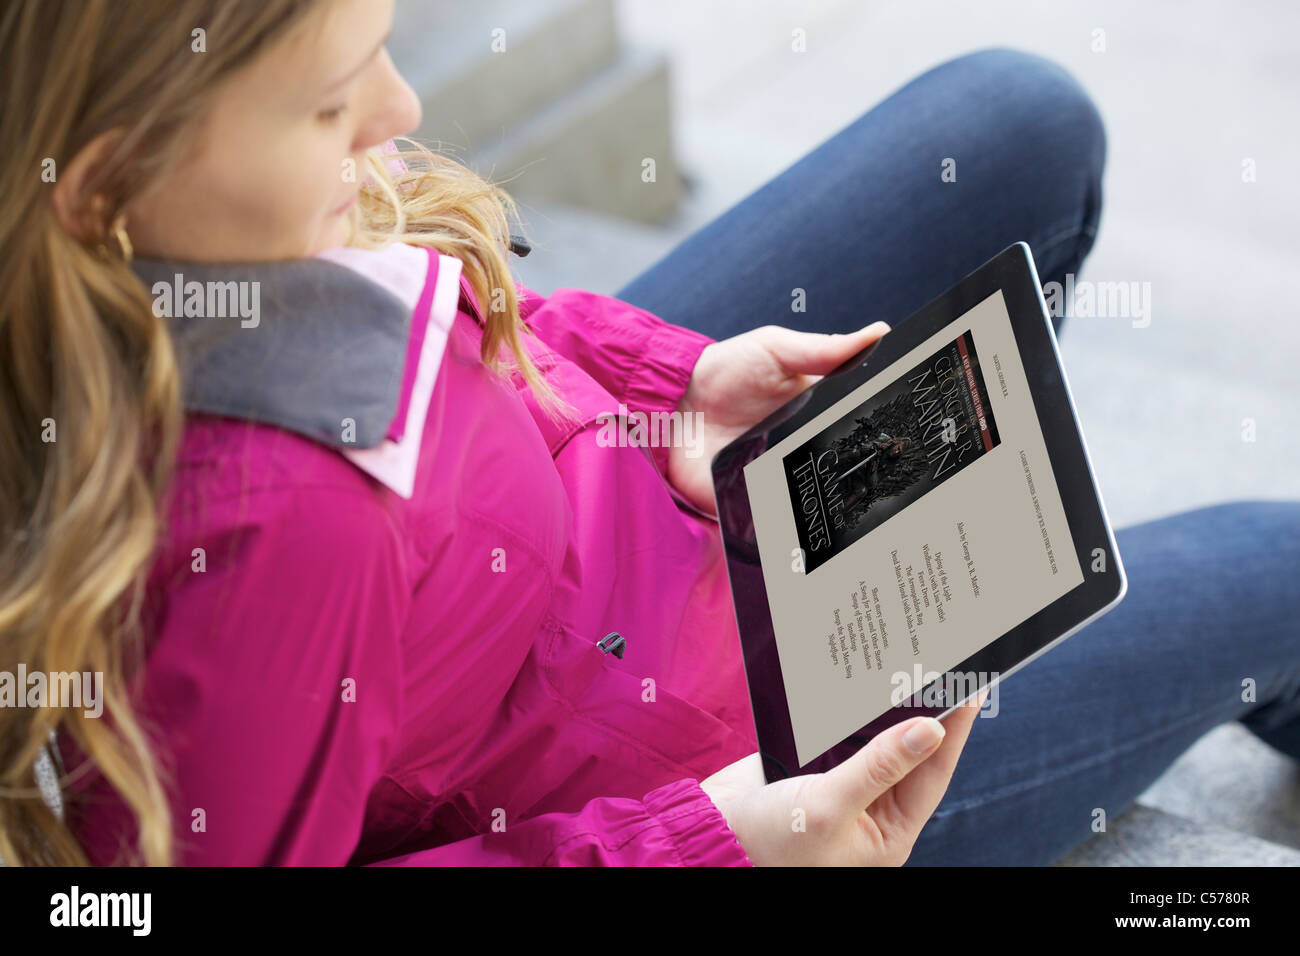 Close up view of a Caucasian young woman reading "A Game of Thrones" book from Kindle Ipad 2 application Stock Photo